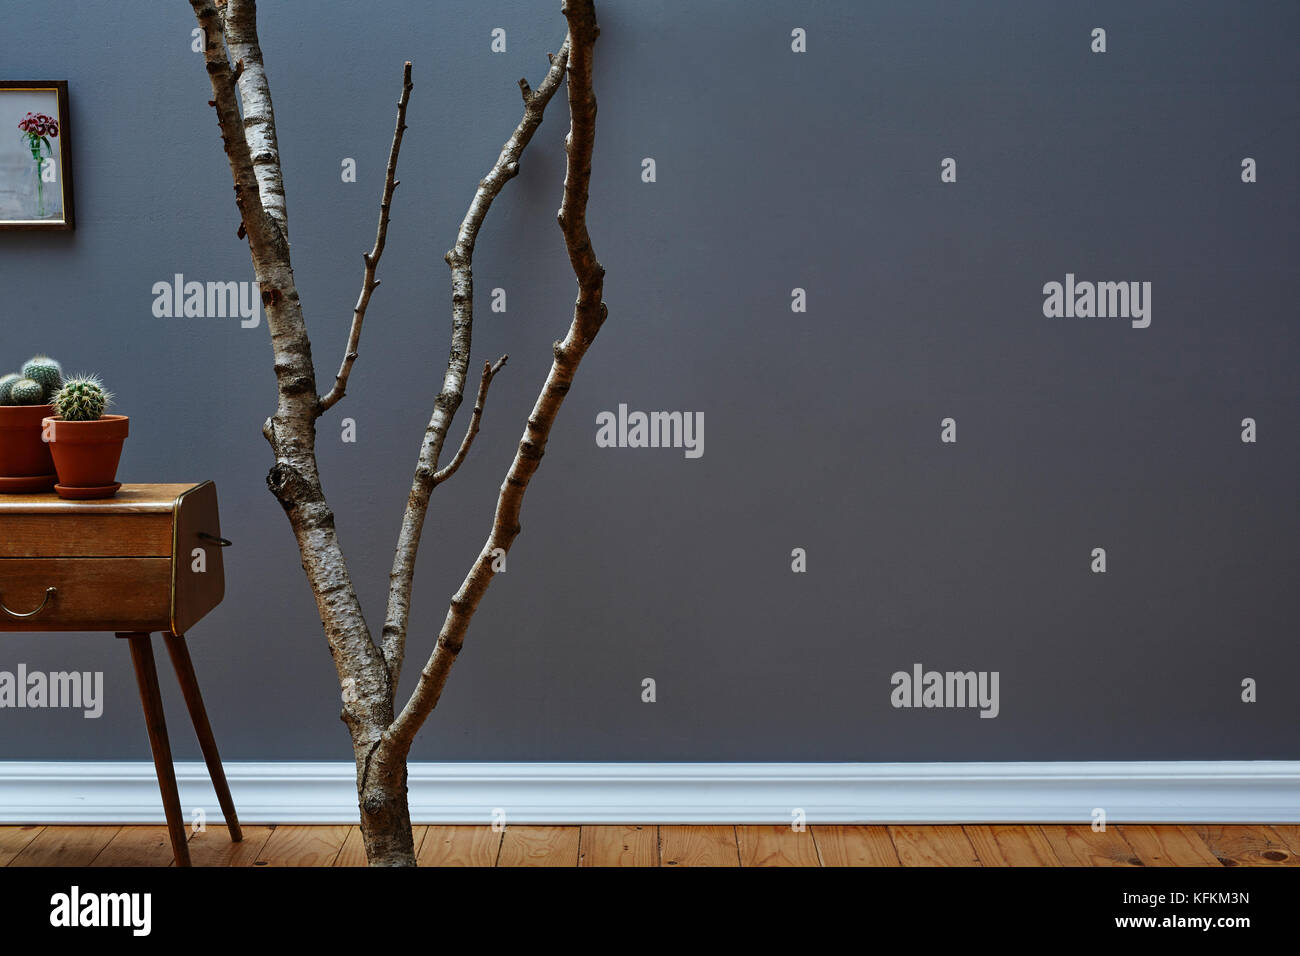 branch and cabinet in loft dark atmosphere Stock Photo